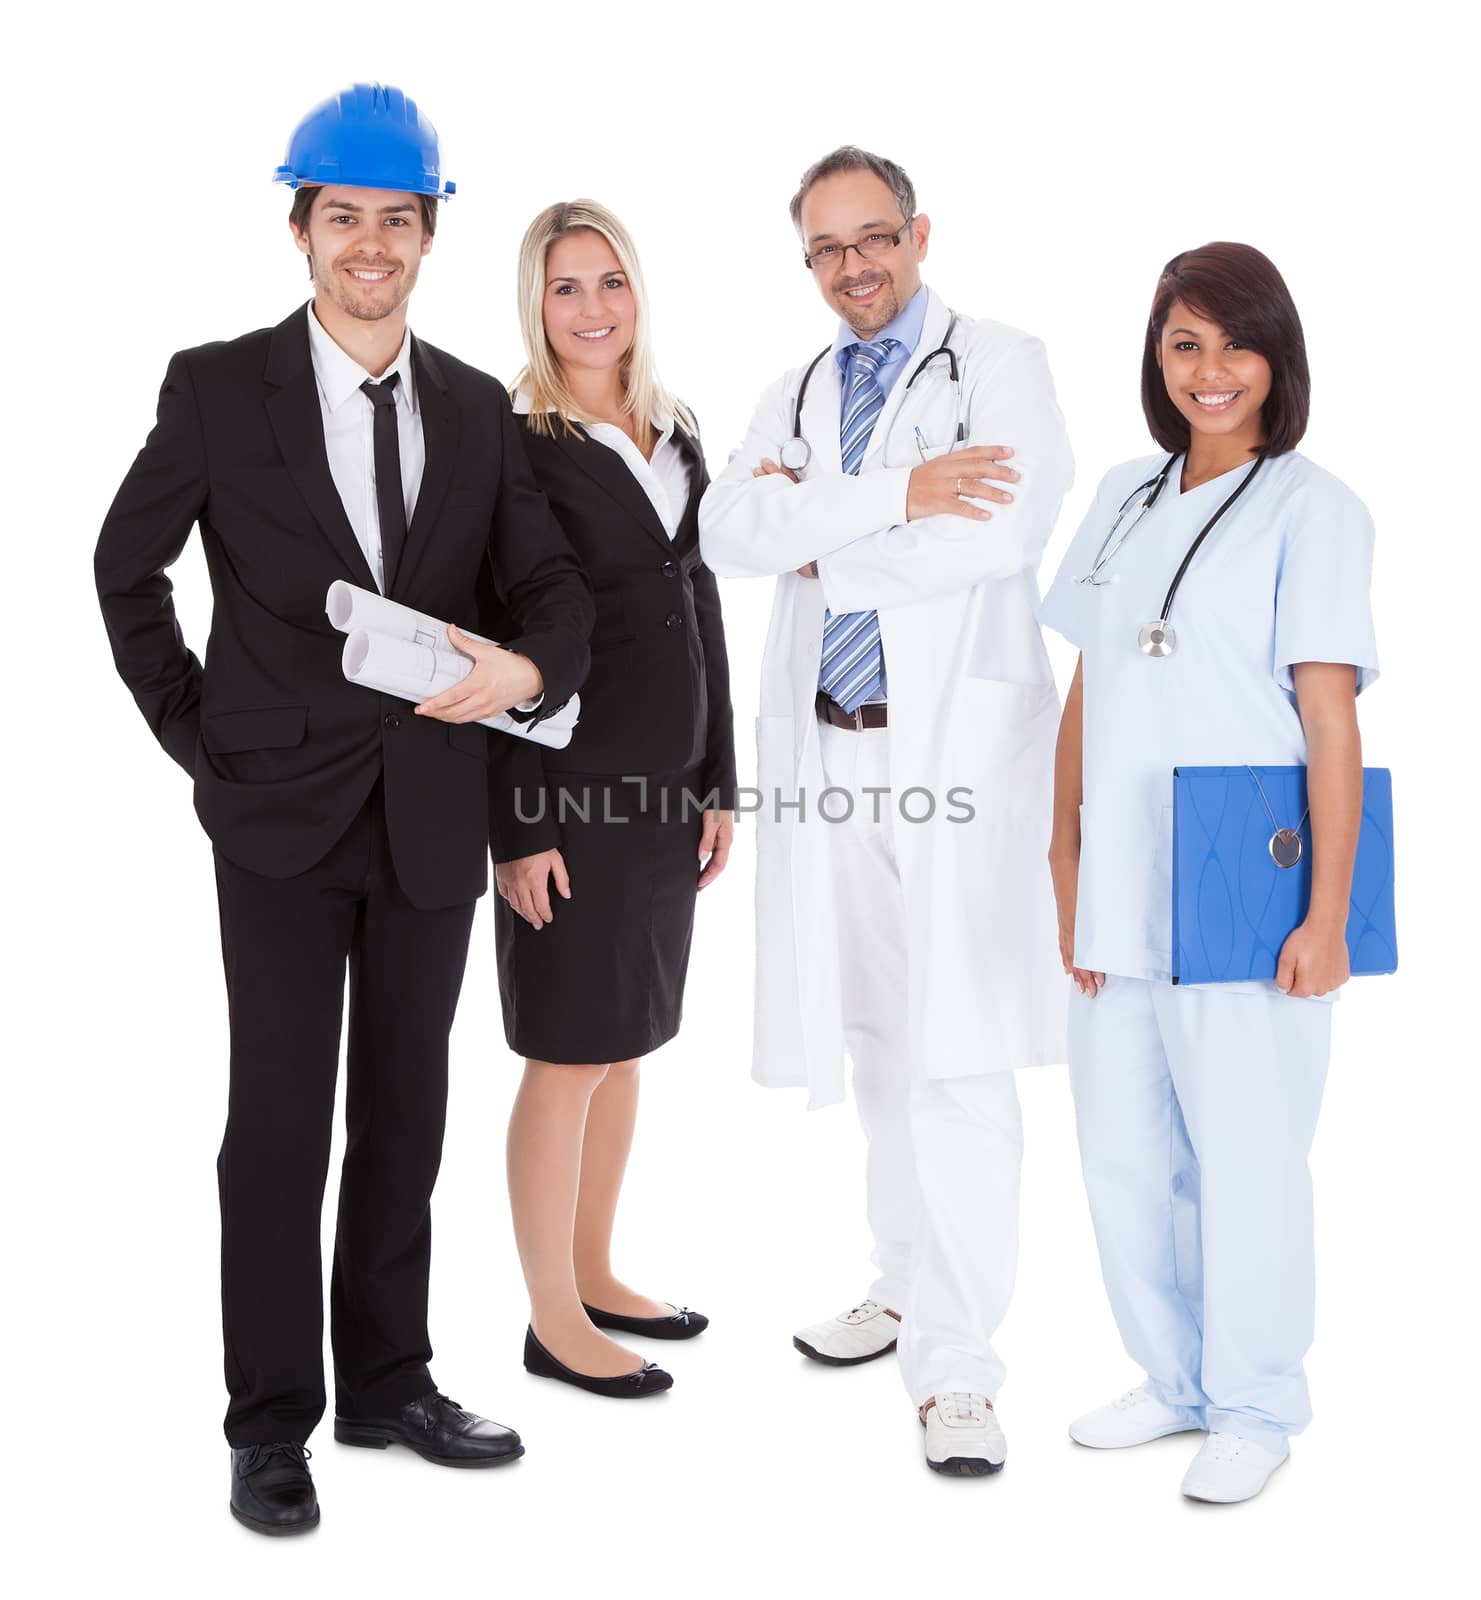 Portrait of happy people of different professions together on white background